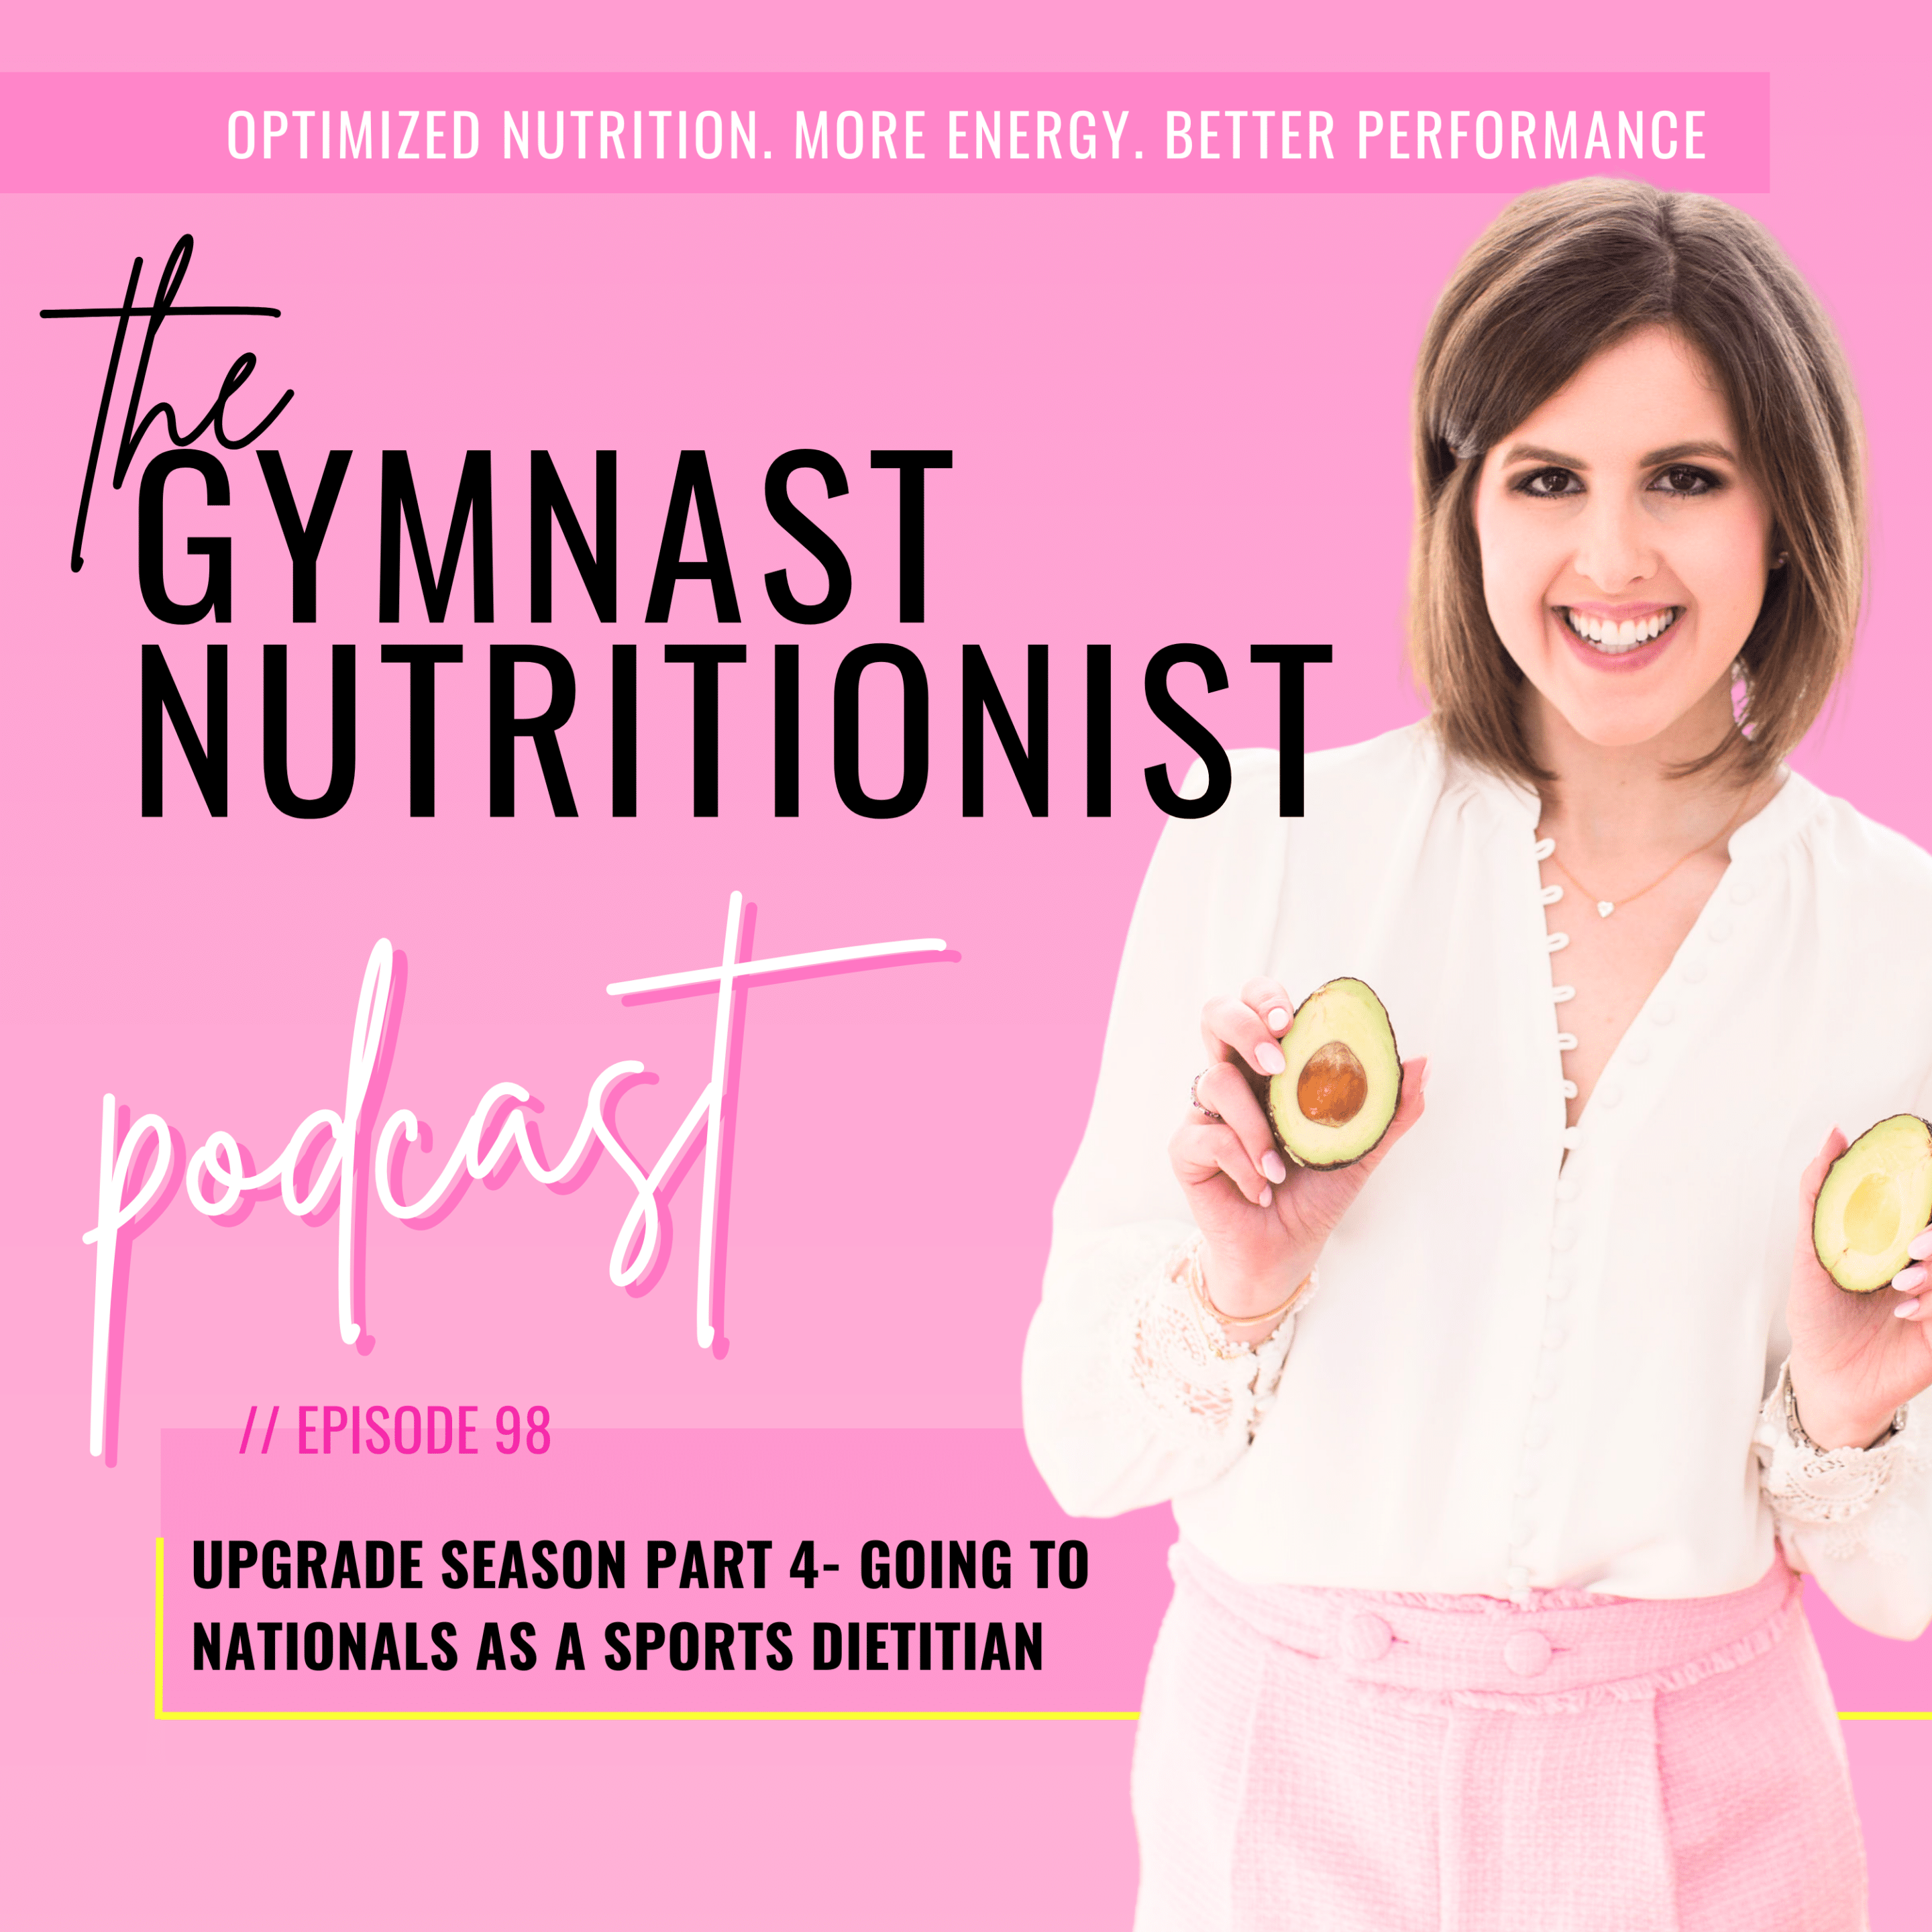 Episode 98: Upgrade Season Part 4- Going to Nationals as a Sports Dietitian